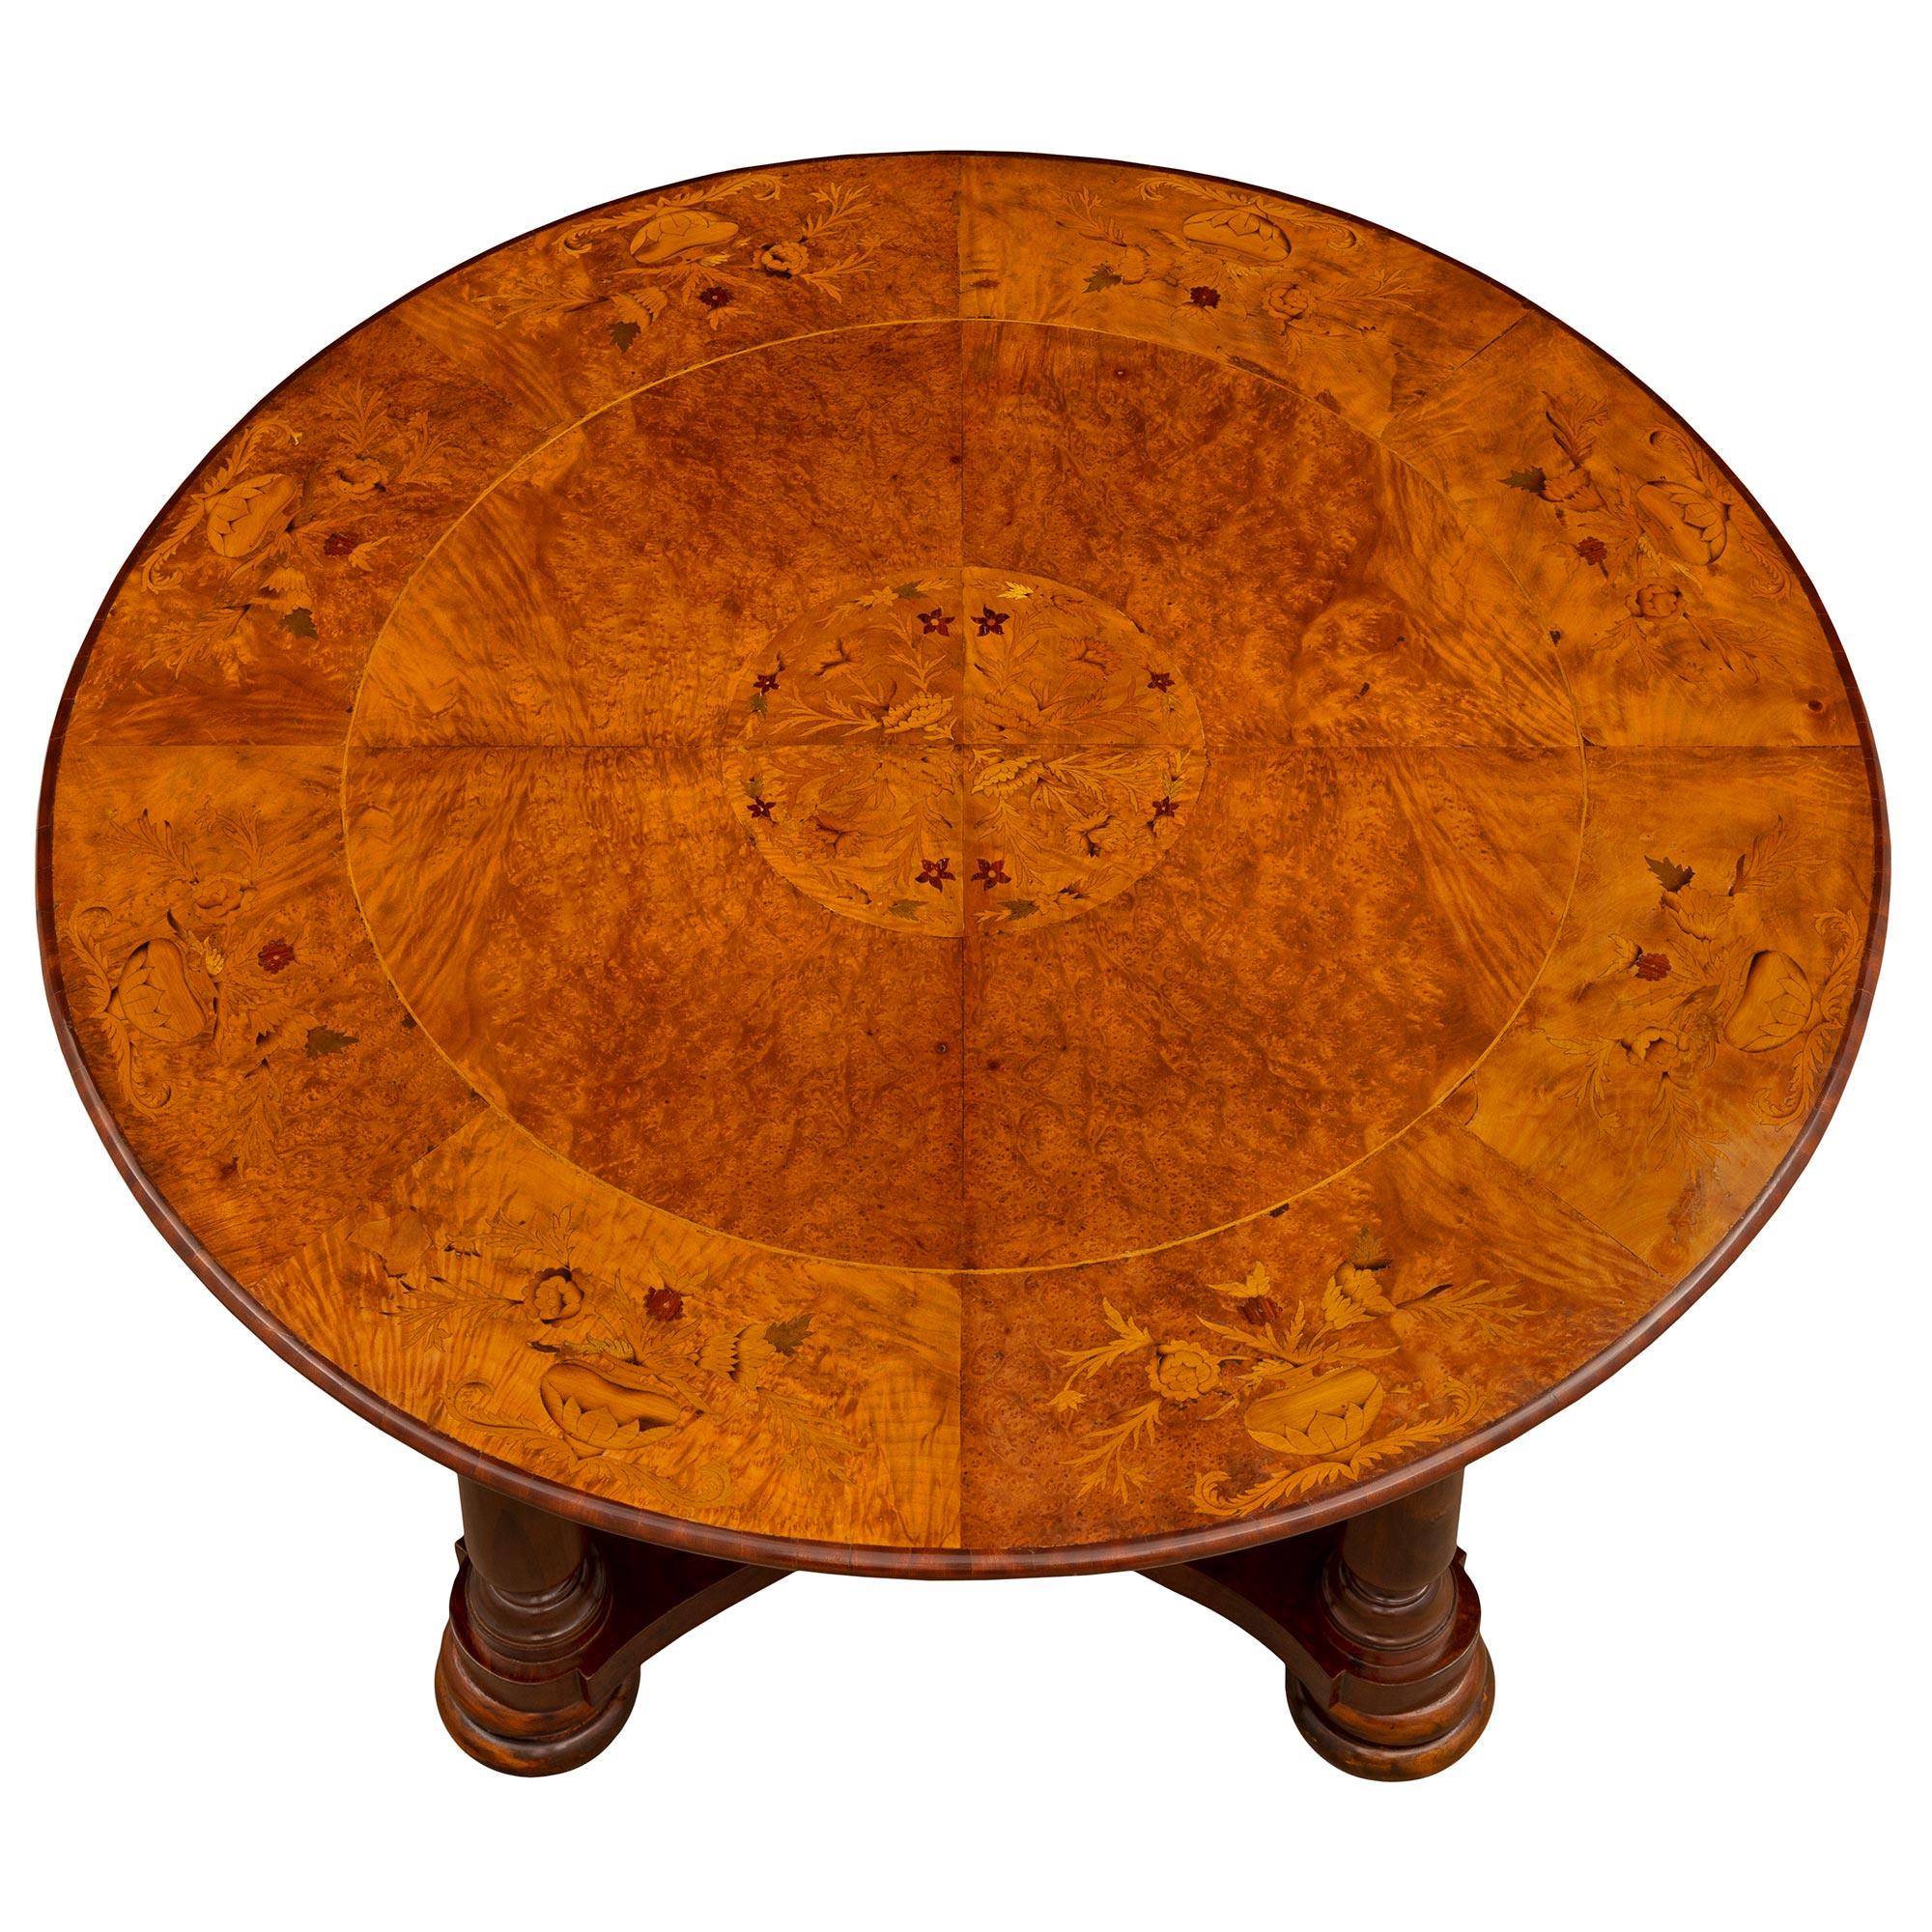 A beautiful Italian 19th century Walnut, burl Walnut, burl Elm and exotic wood center table. The circular table is raised by most decorative double mottled bun feet below circular turned tapered legs with an elegant mottled base and finely carved